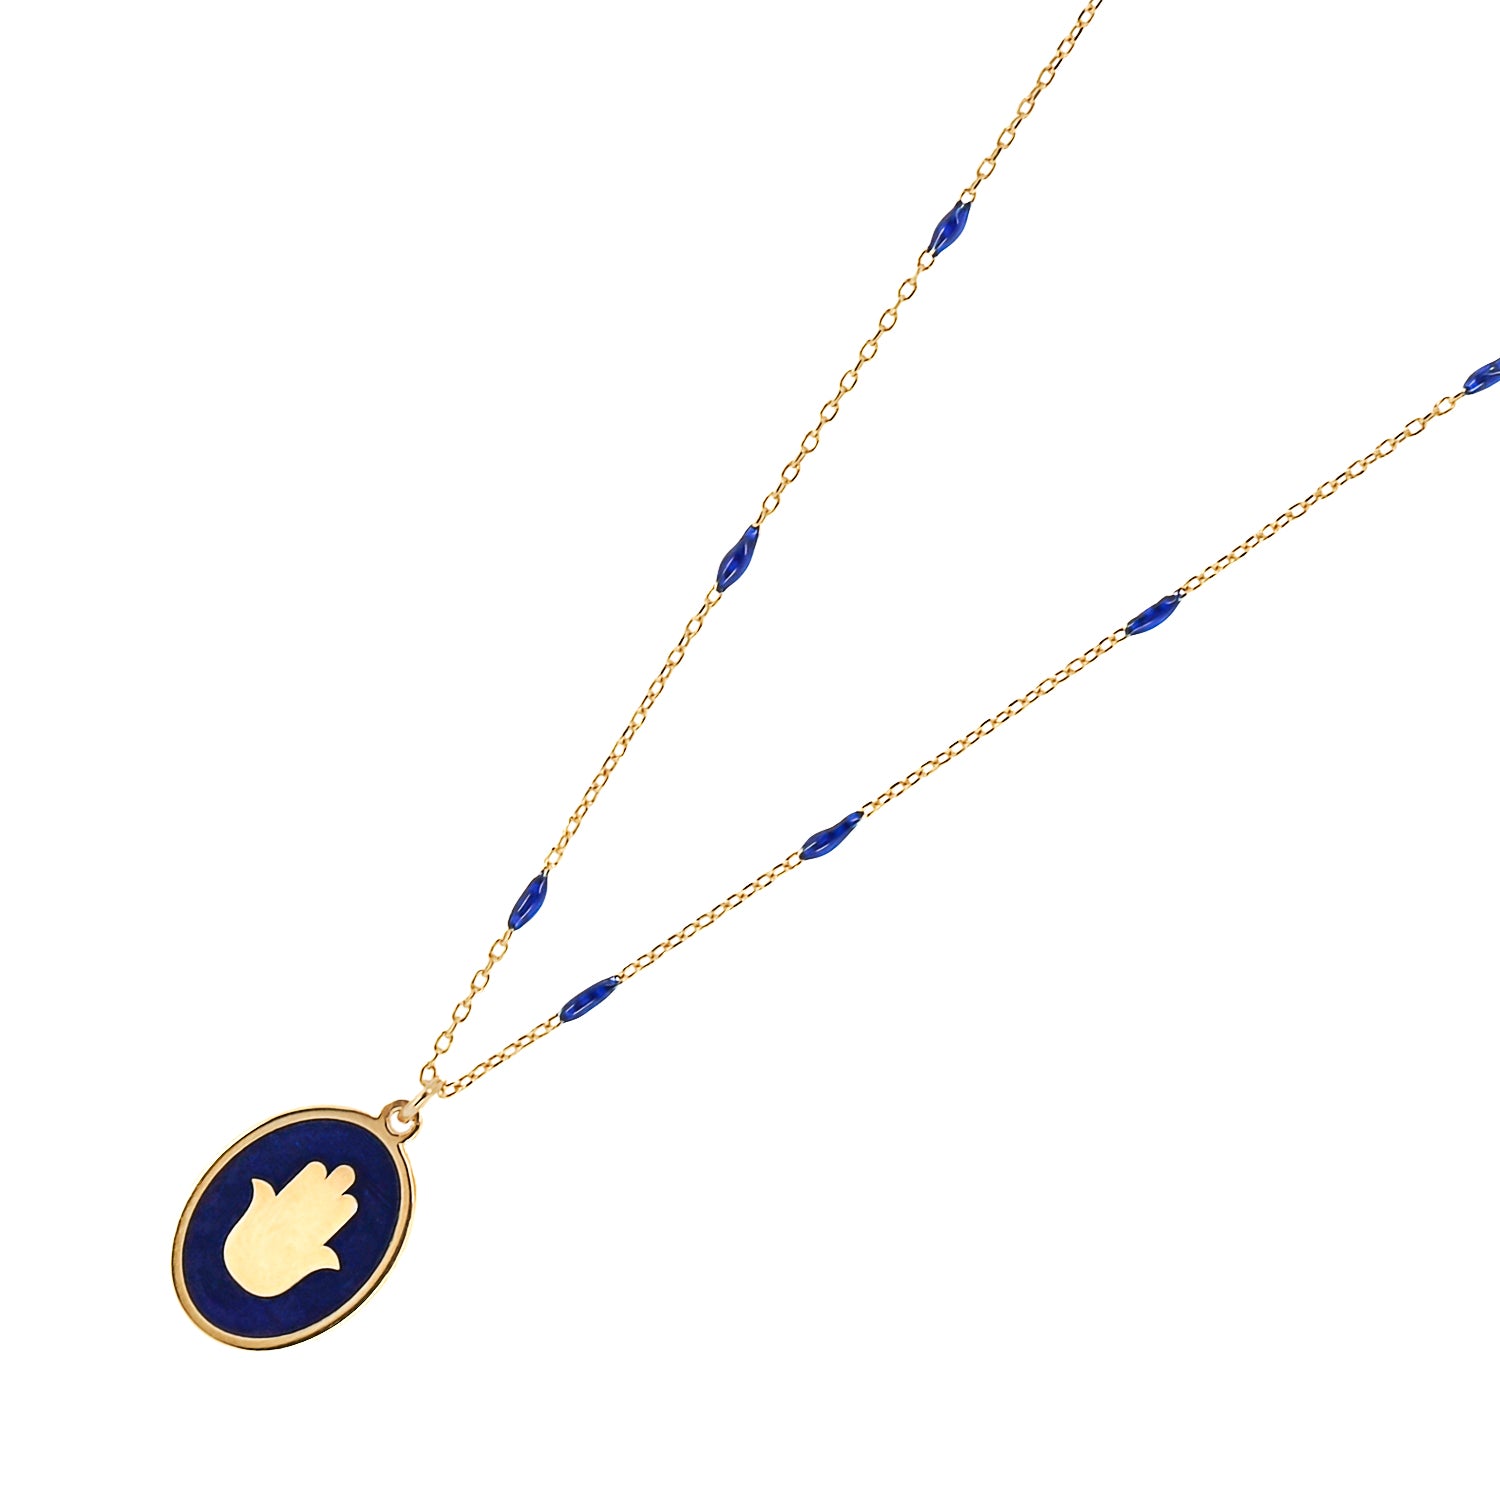 Sterling Silver Necklace with 18K Gold Plating - Radiating Elegance.